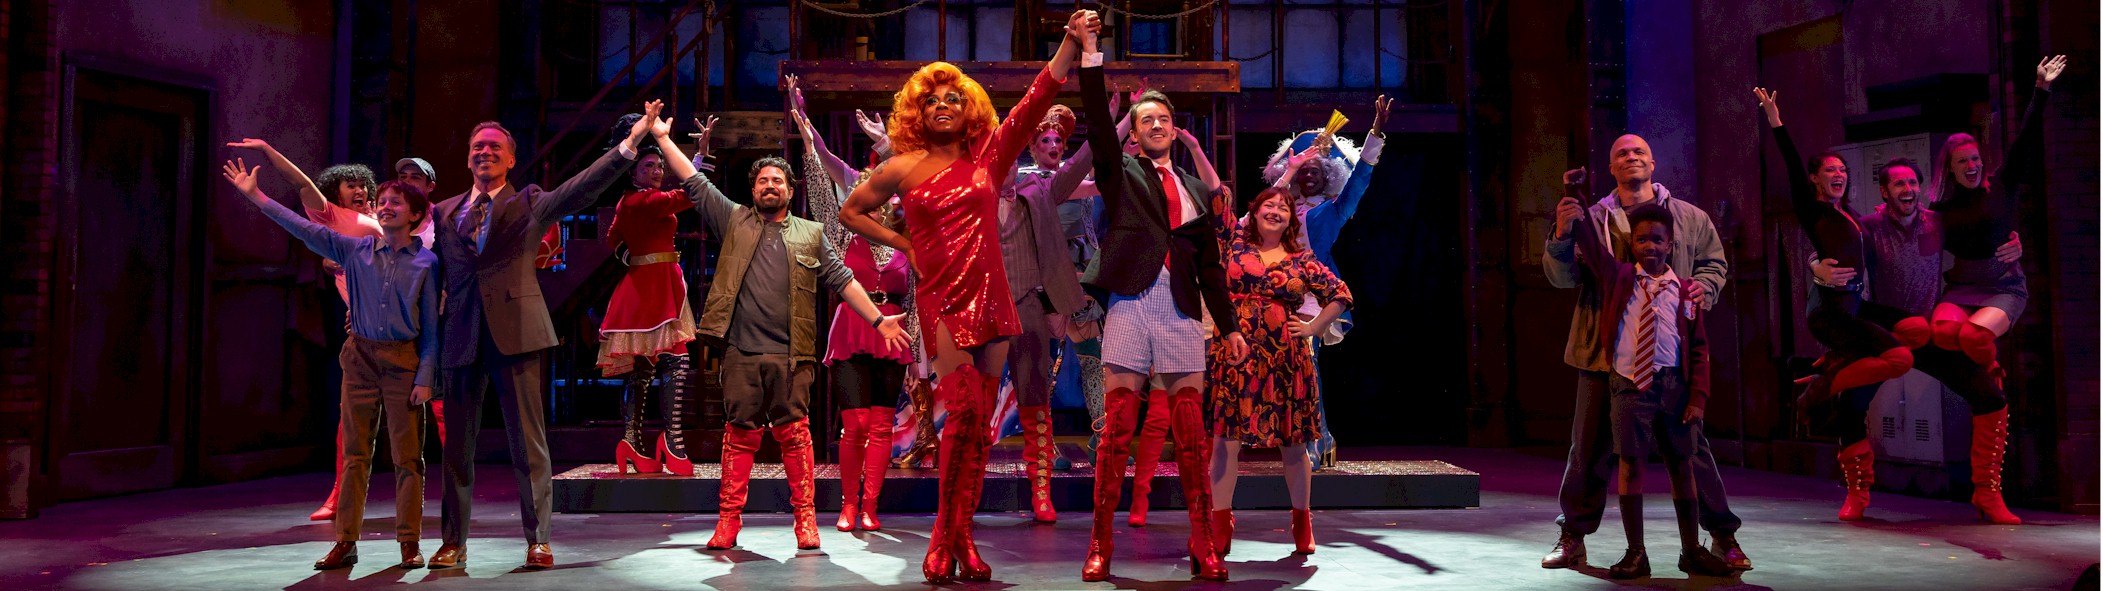 Cast members of the musical Kinky Boots onstage with their arms raised in joy